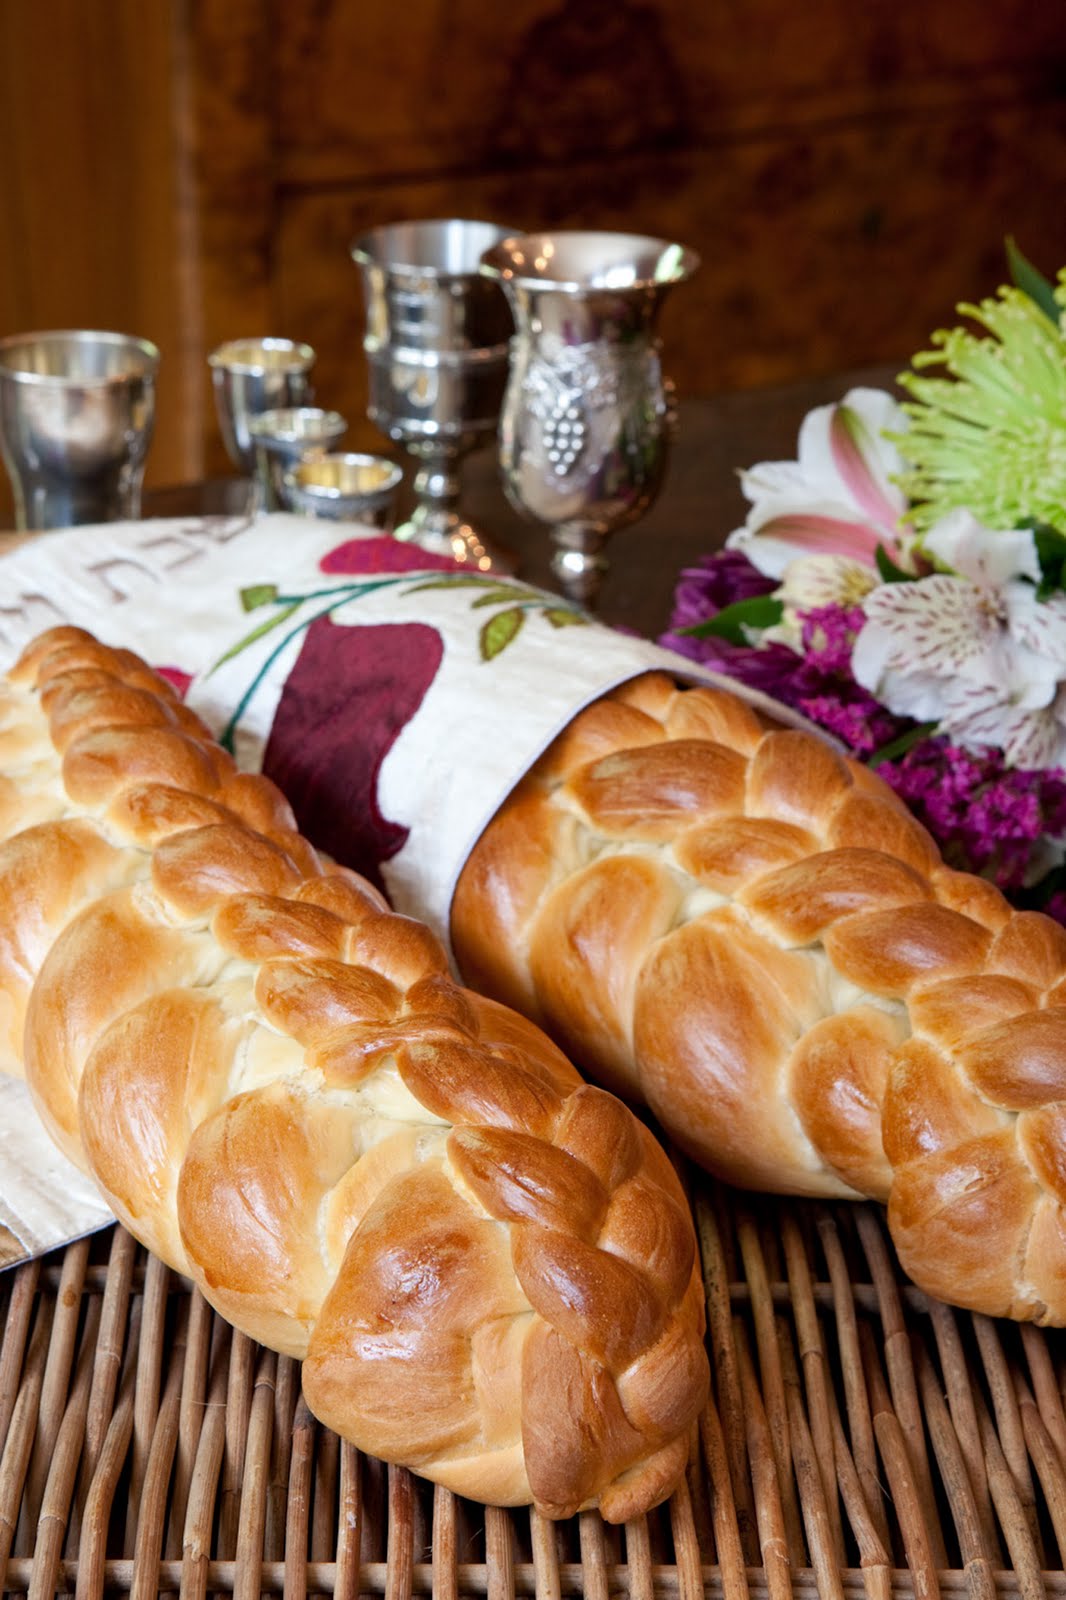 welcome to a new world of kosher: Summer of the Sandwich – Challah Pita